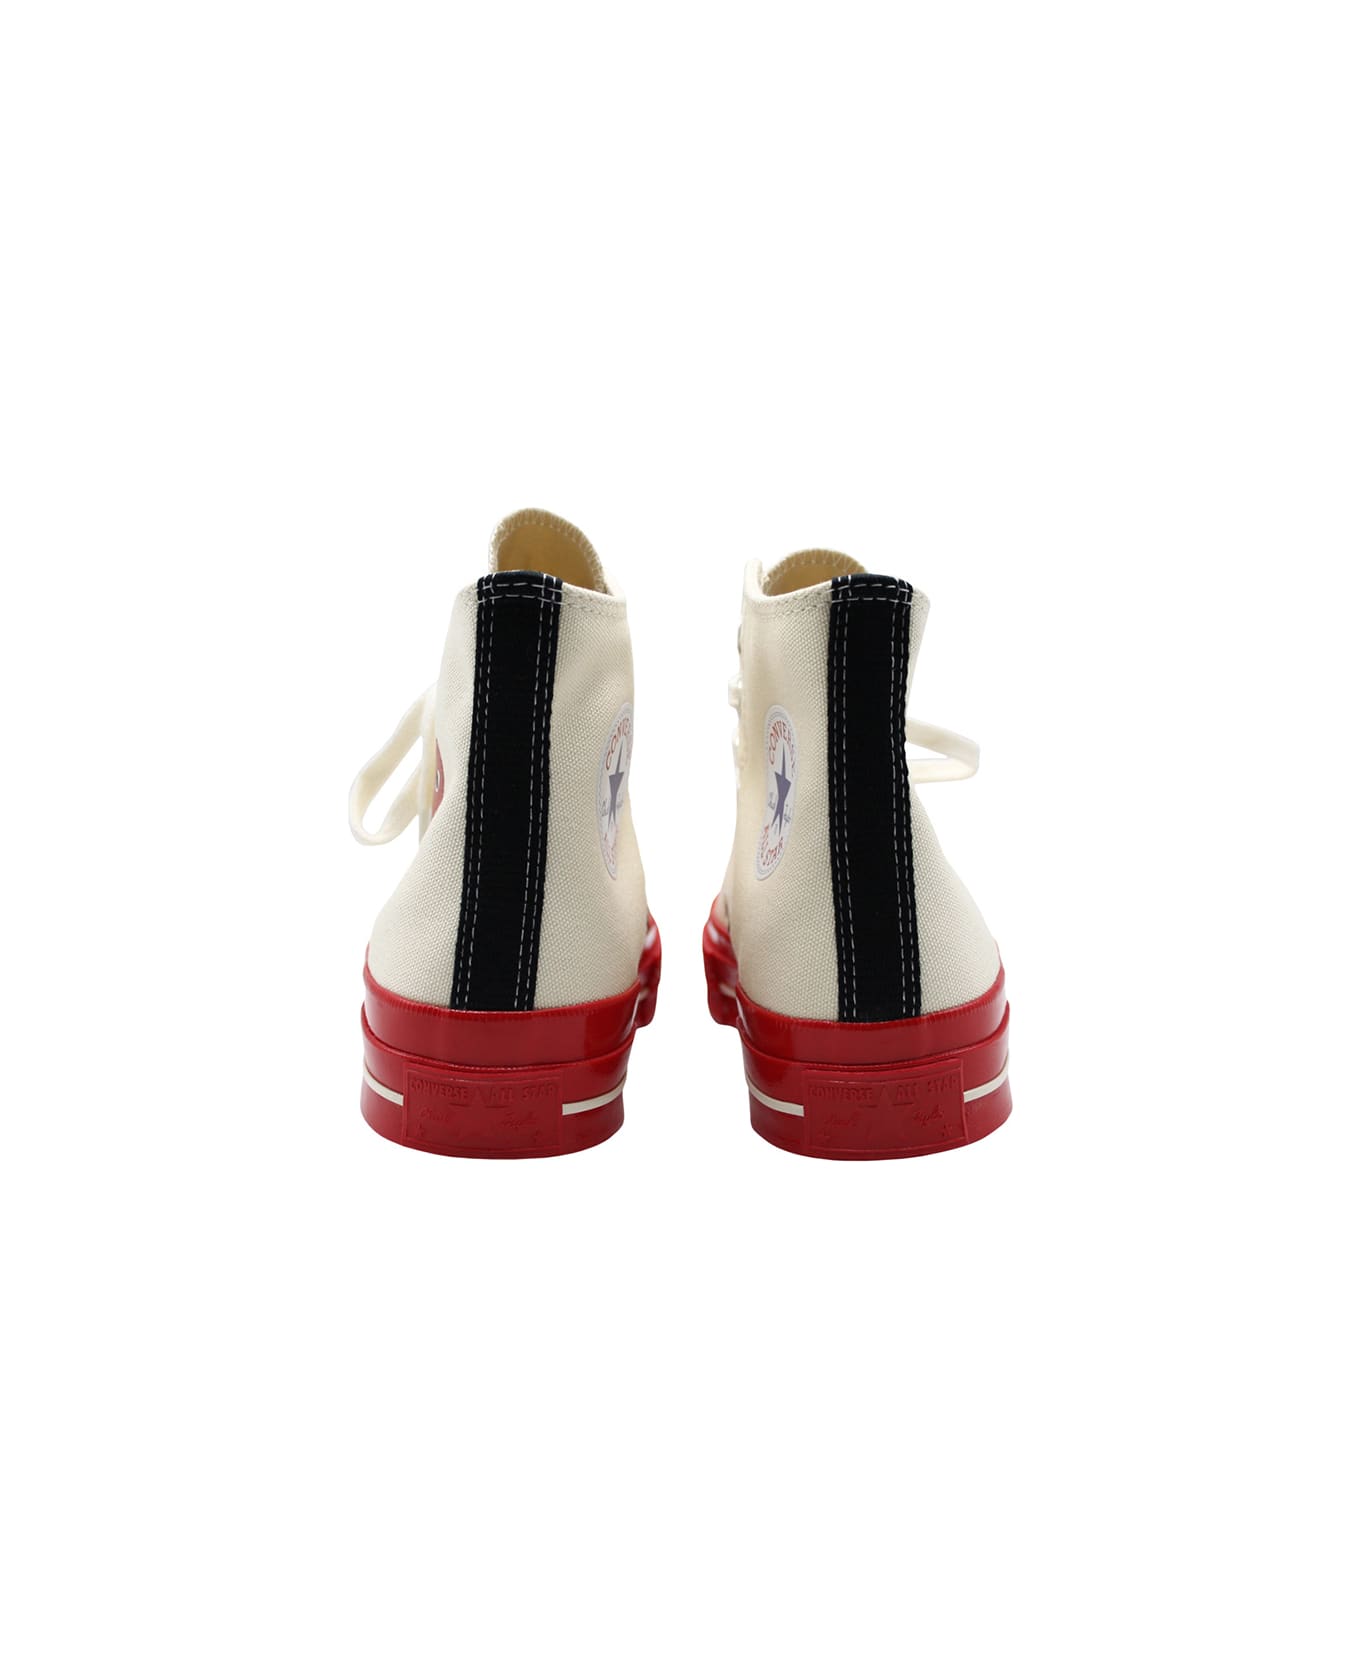 Comme des Garçons Play Red Sole Chuck 70 In White